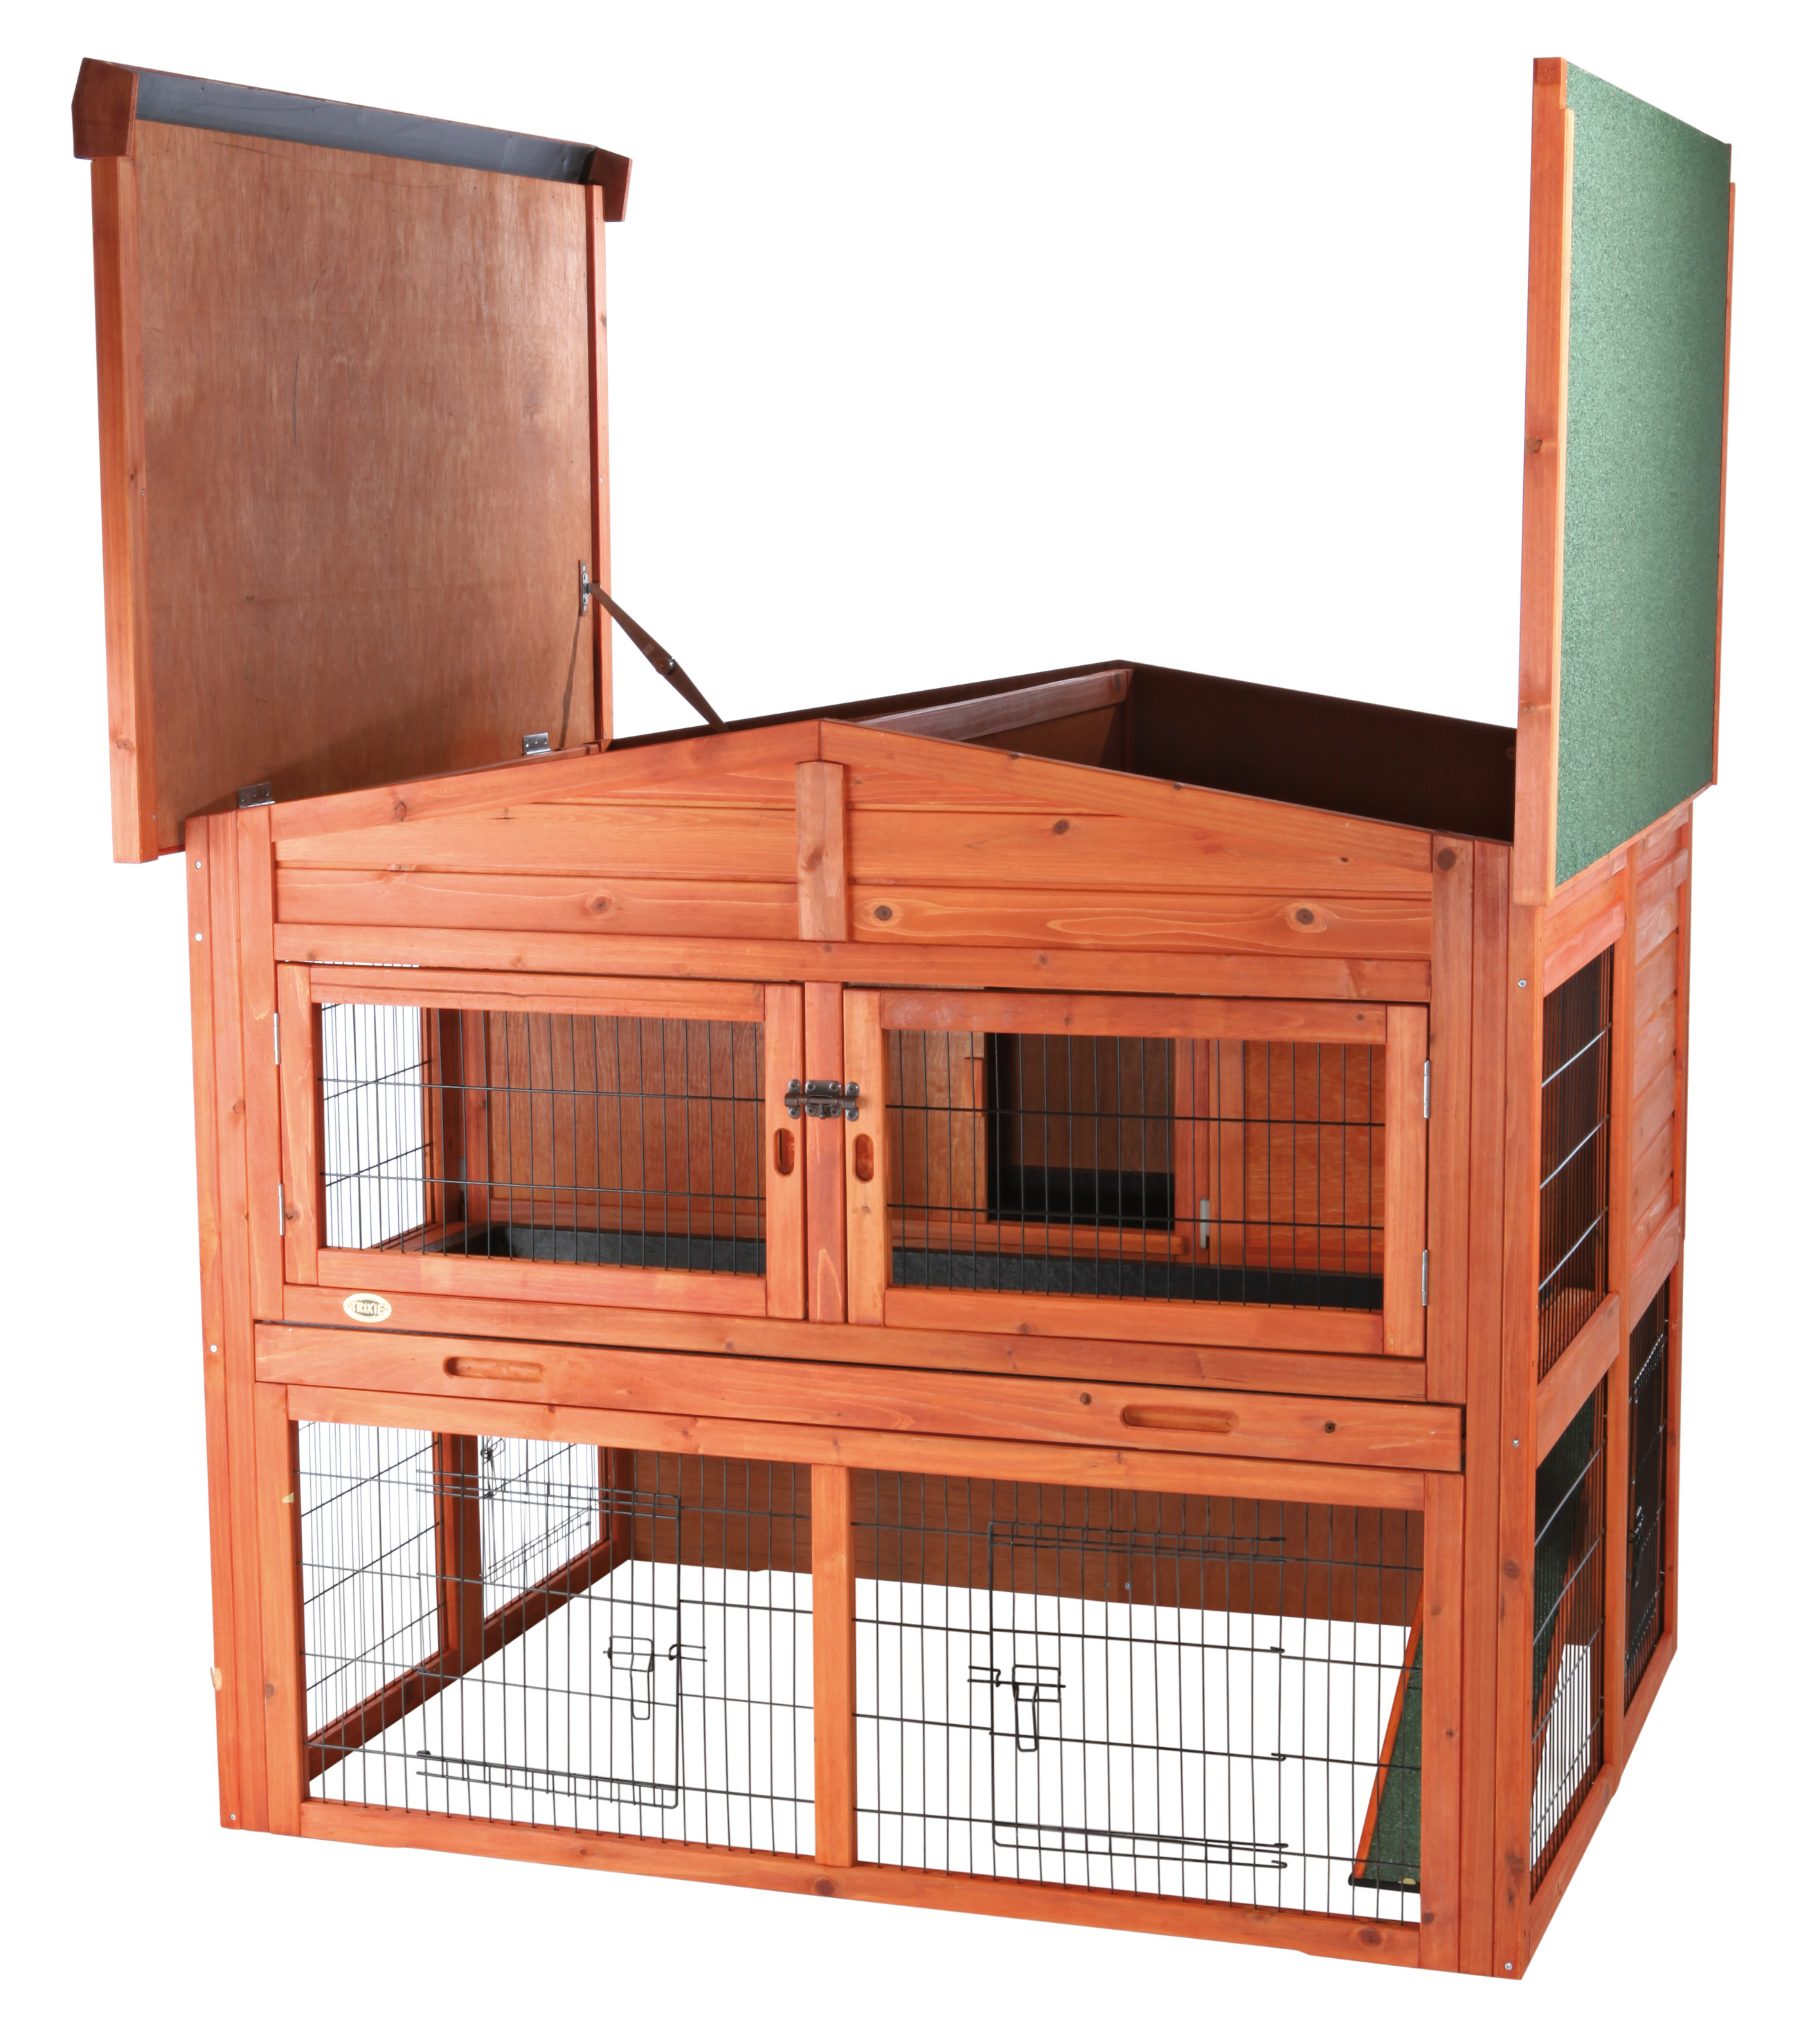 TRIXIE Deluxe Weatherproof Outdoor 2-Story Large Wooden Small Animal Hutch, Run, Tray, Brown - image 5 of 7